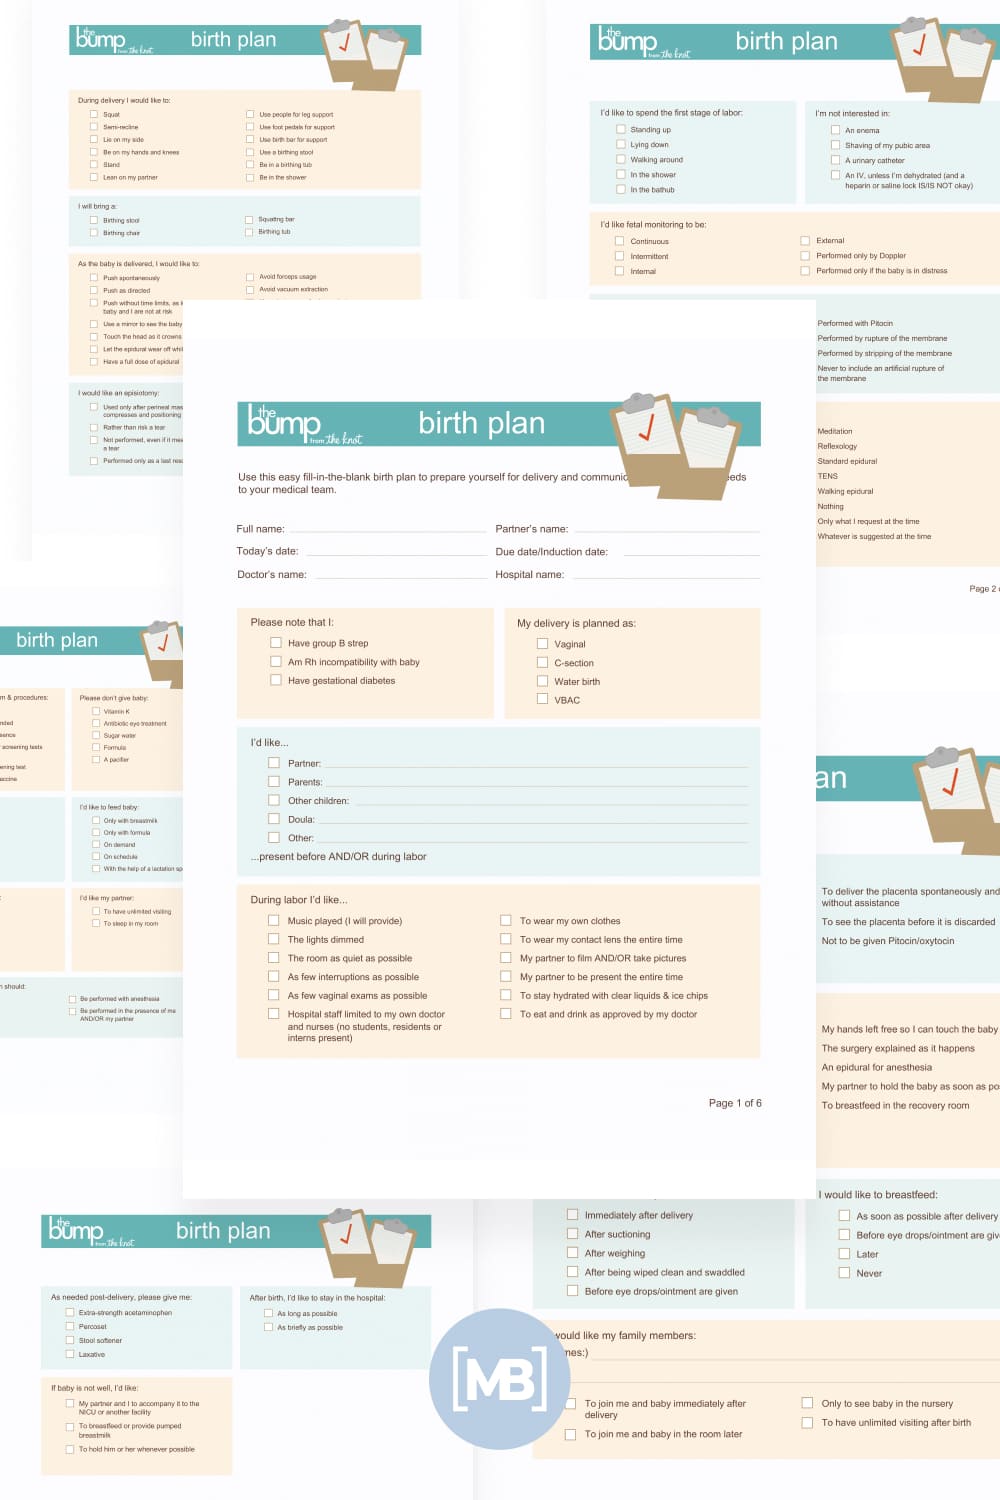 10+ Best Birth Plan Templates for 2021. Best Free and Premium Templates